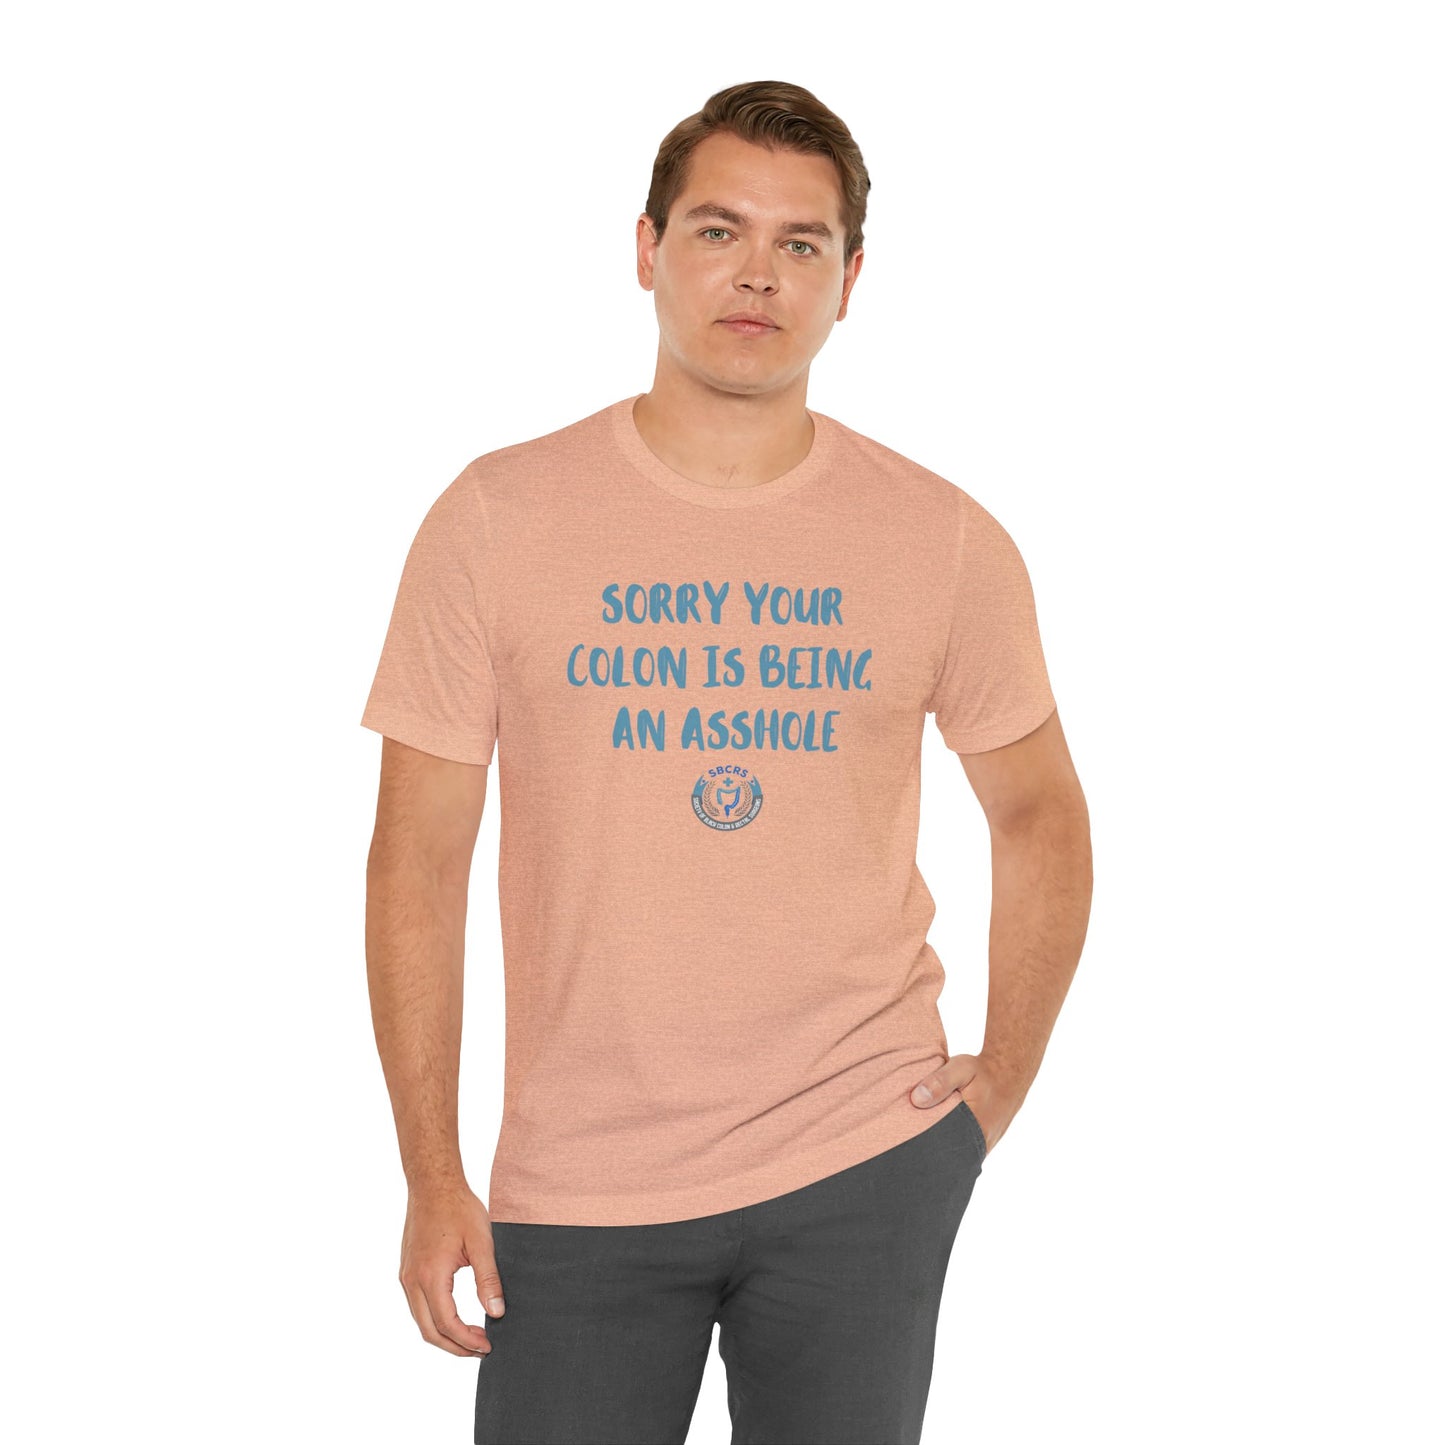 Sorry Your Colon is Being an Asshole Tshirt